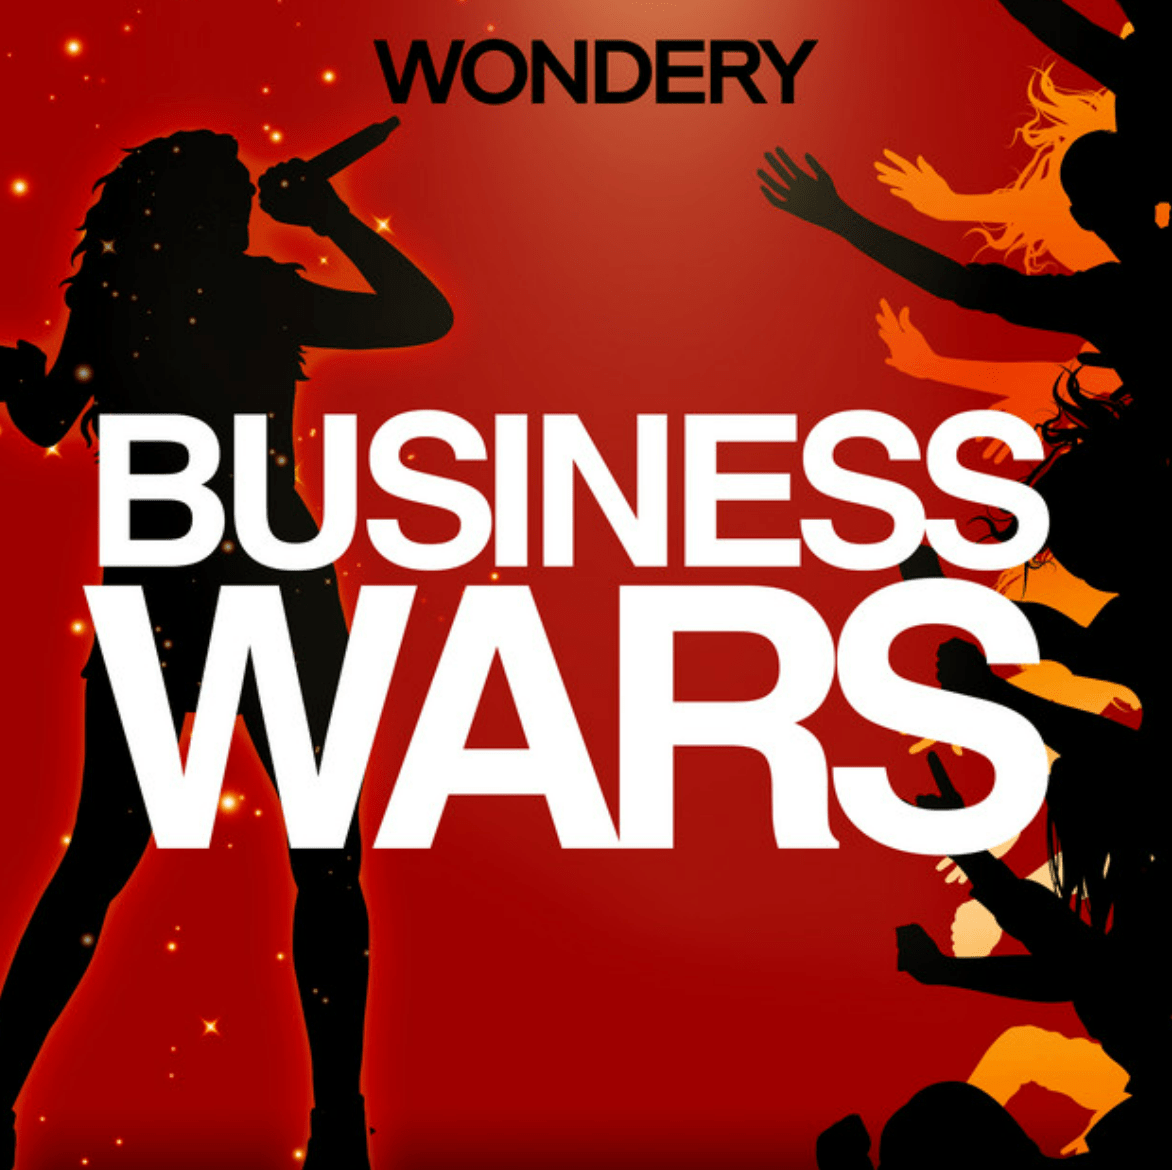 Business Wars podcast cover